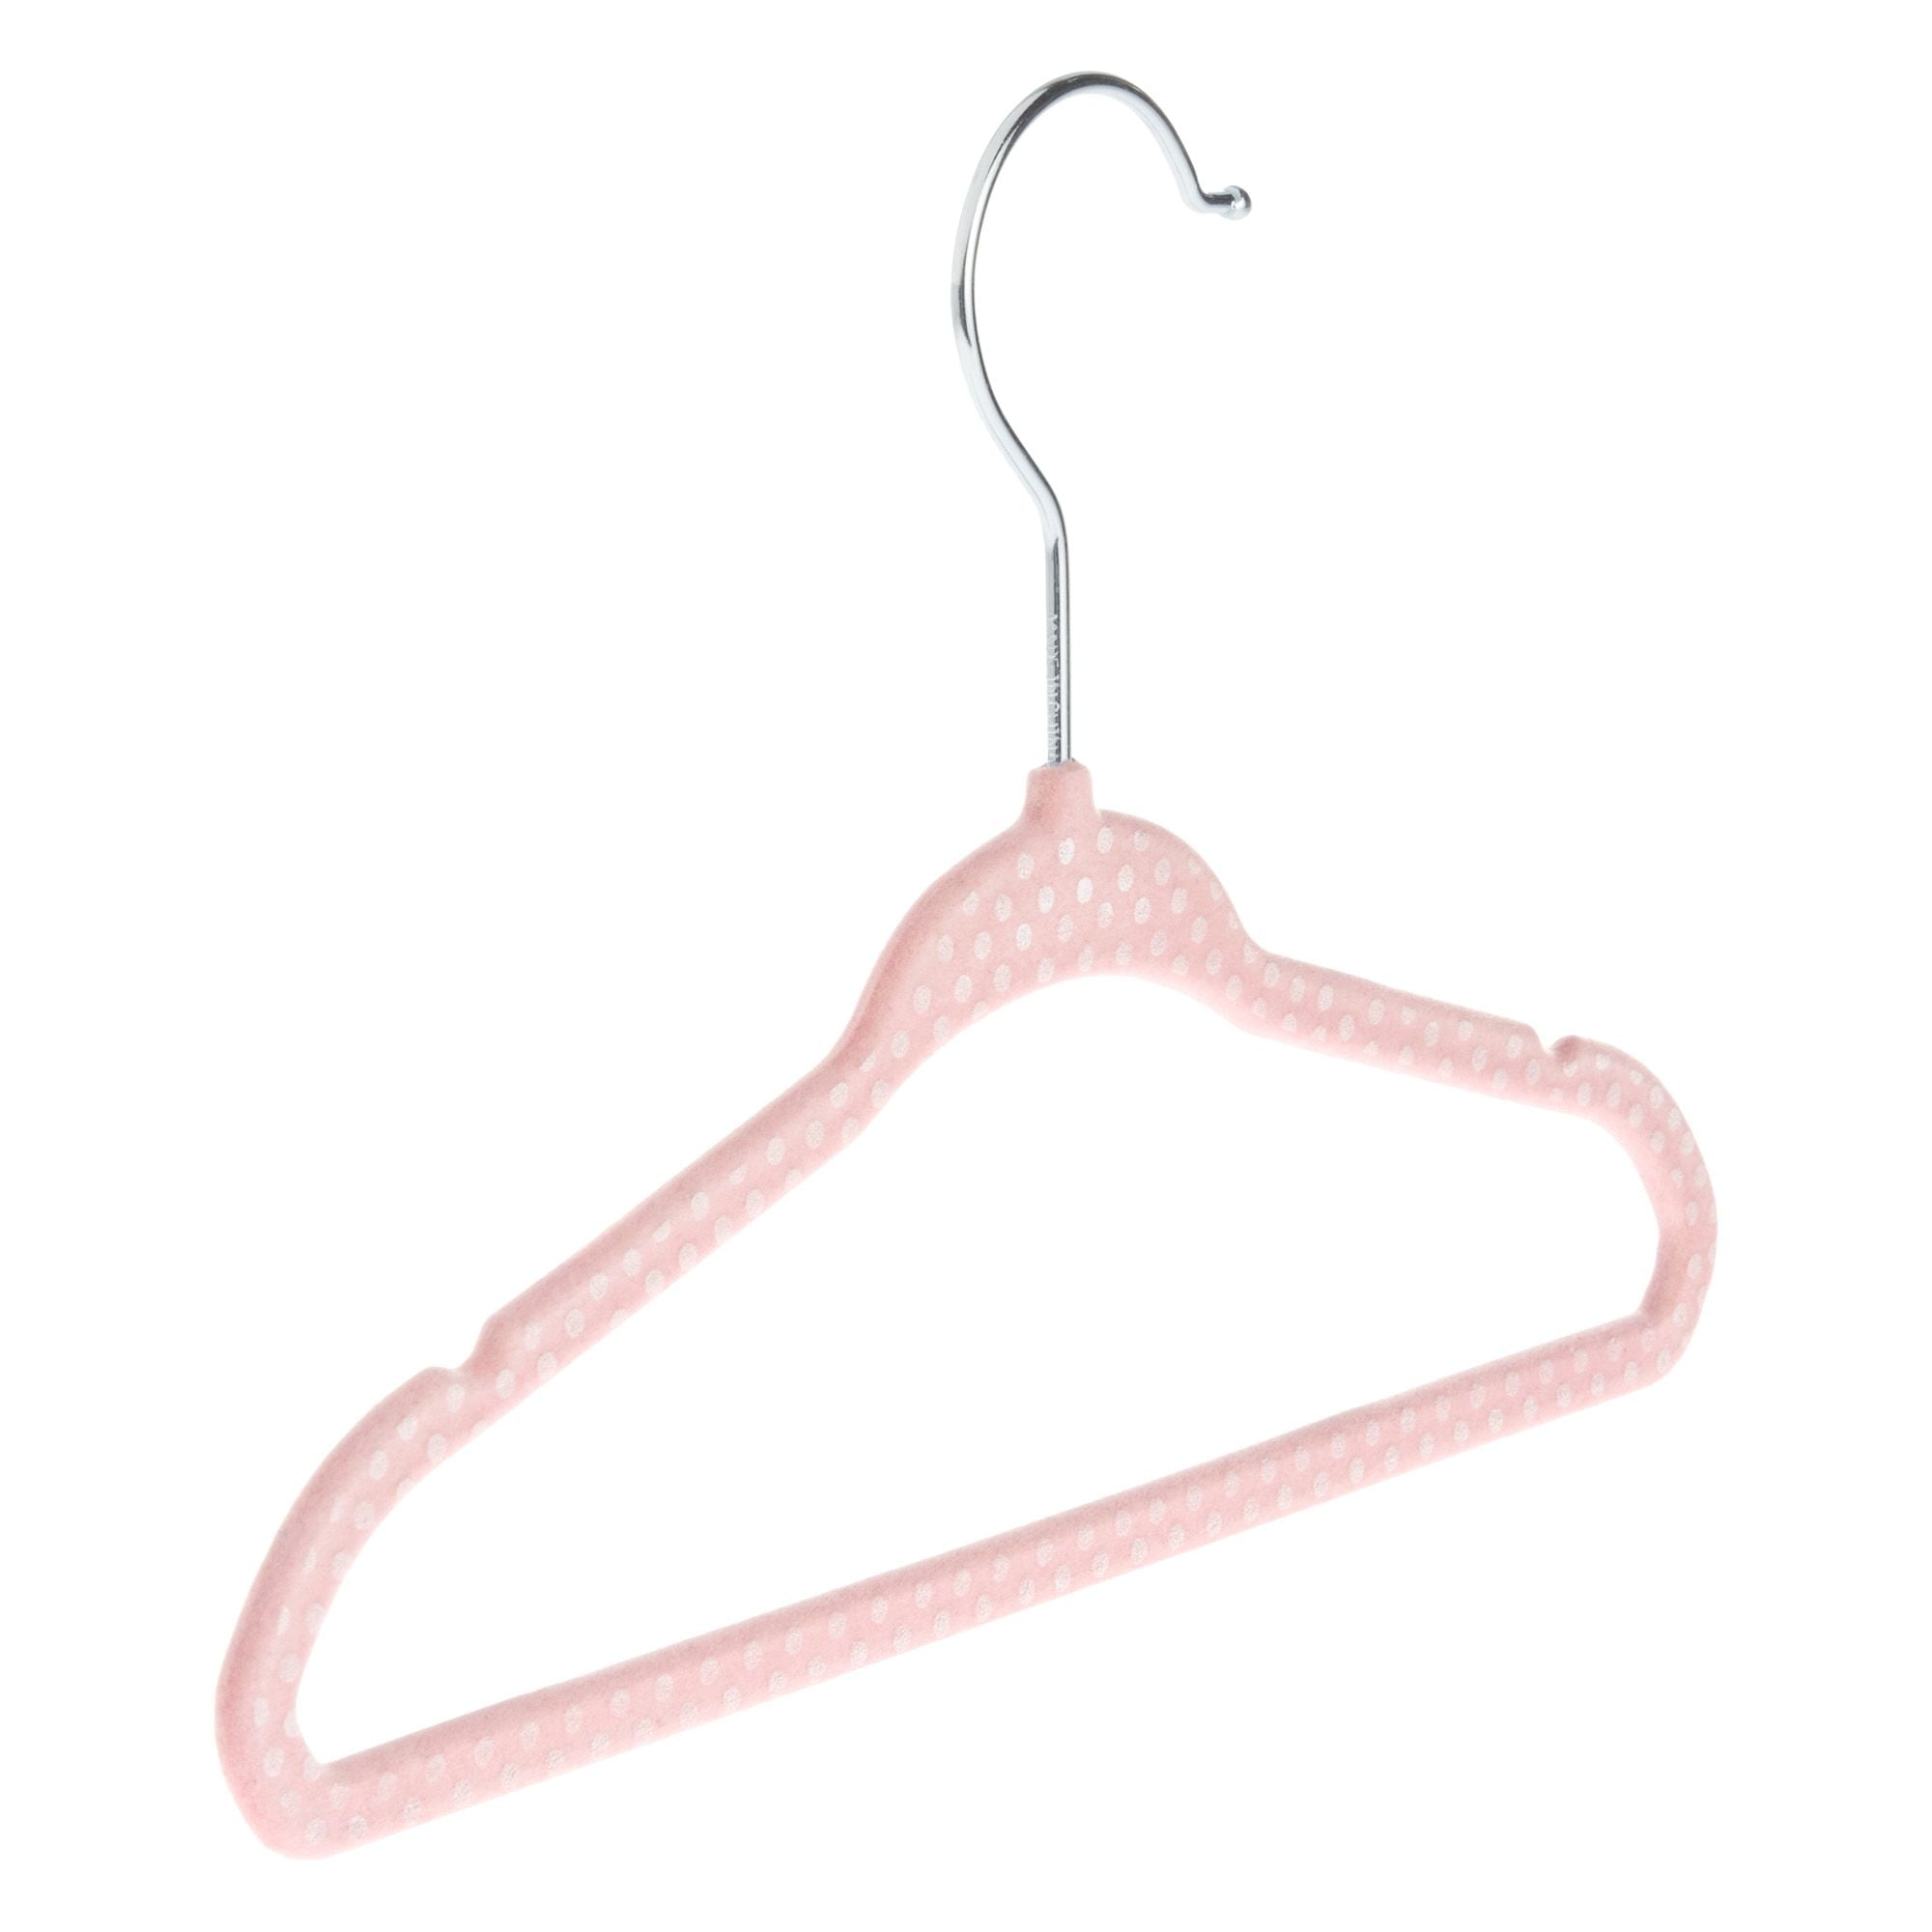  60pk Made in USA Baby Hangers, Kids Hangers for Children's  Clothes, Toddler Outfits and Clothing, 20 50 100 Pack Available, Kid  Plastic Hanger for Closet and Nursery